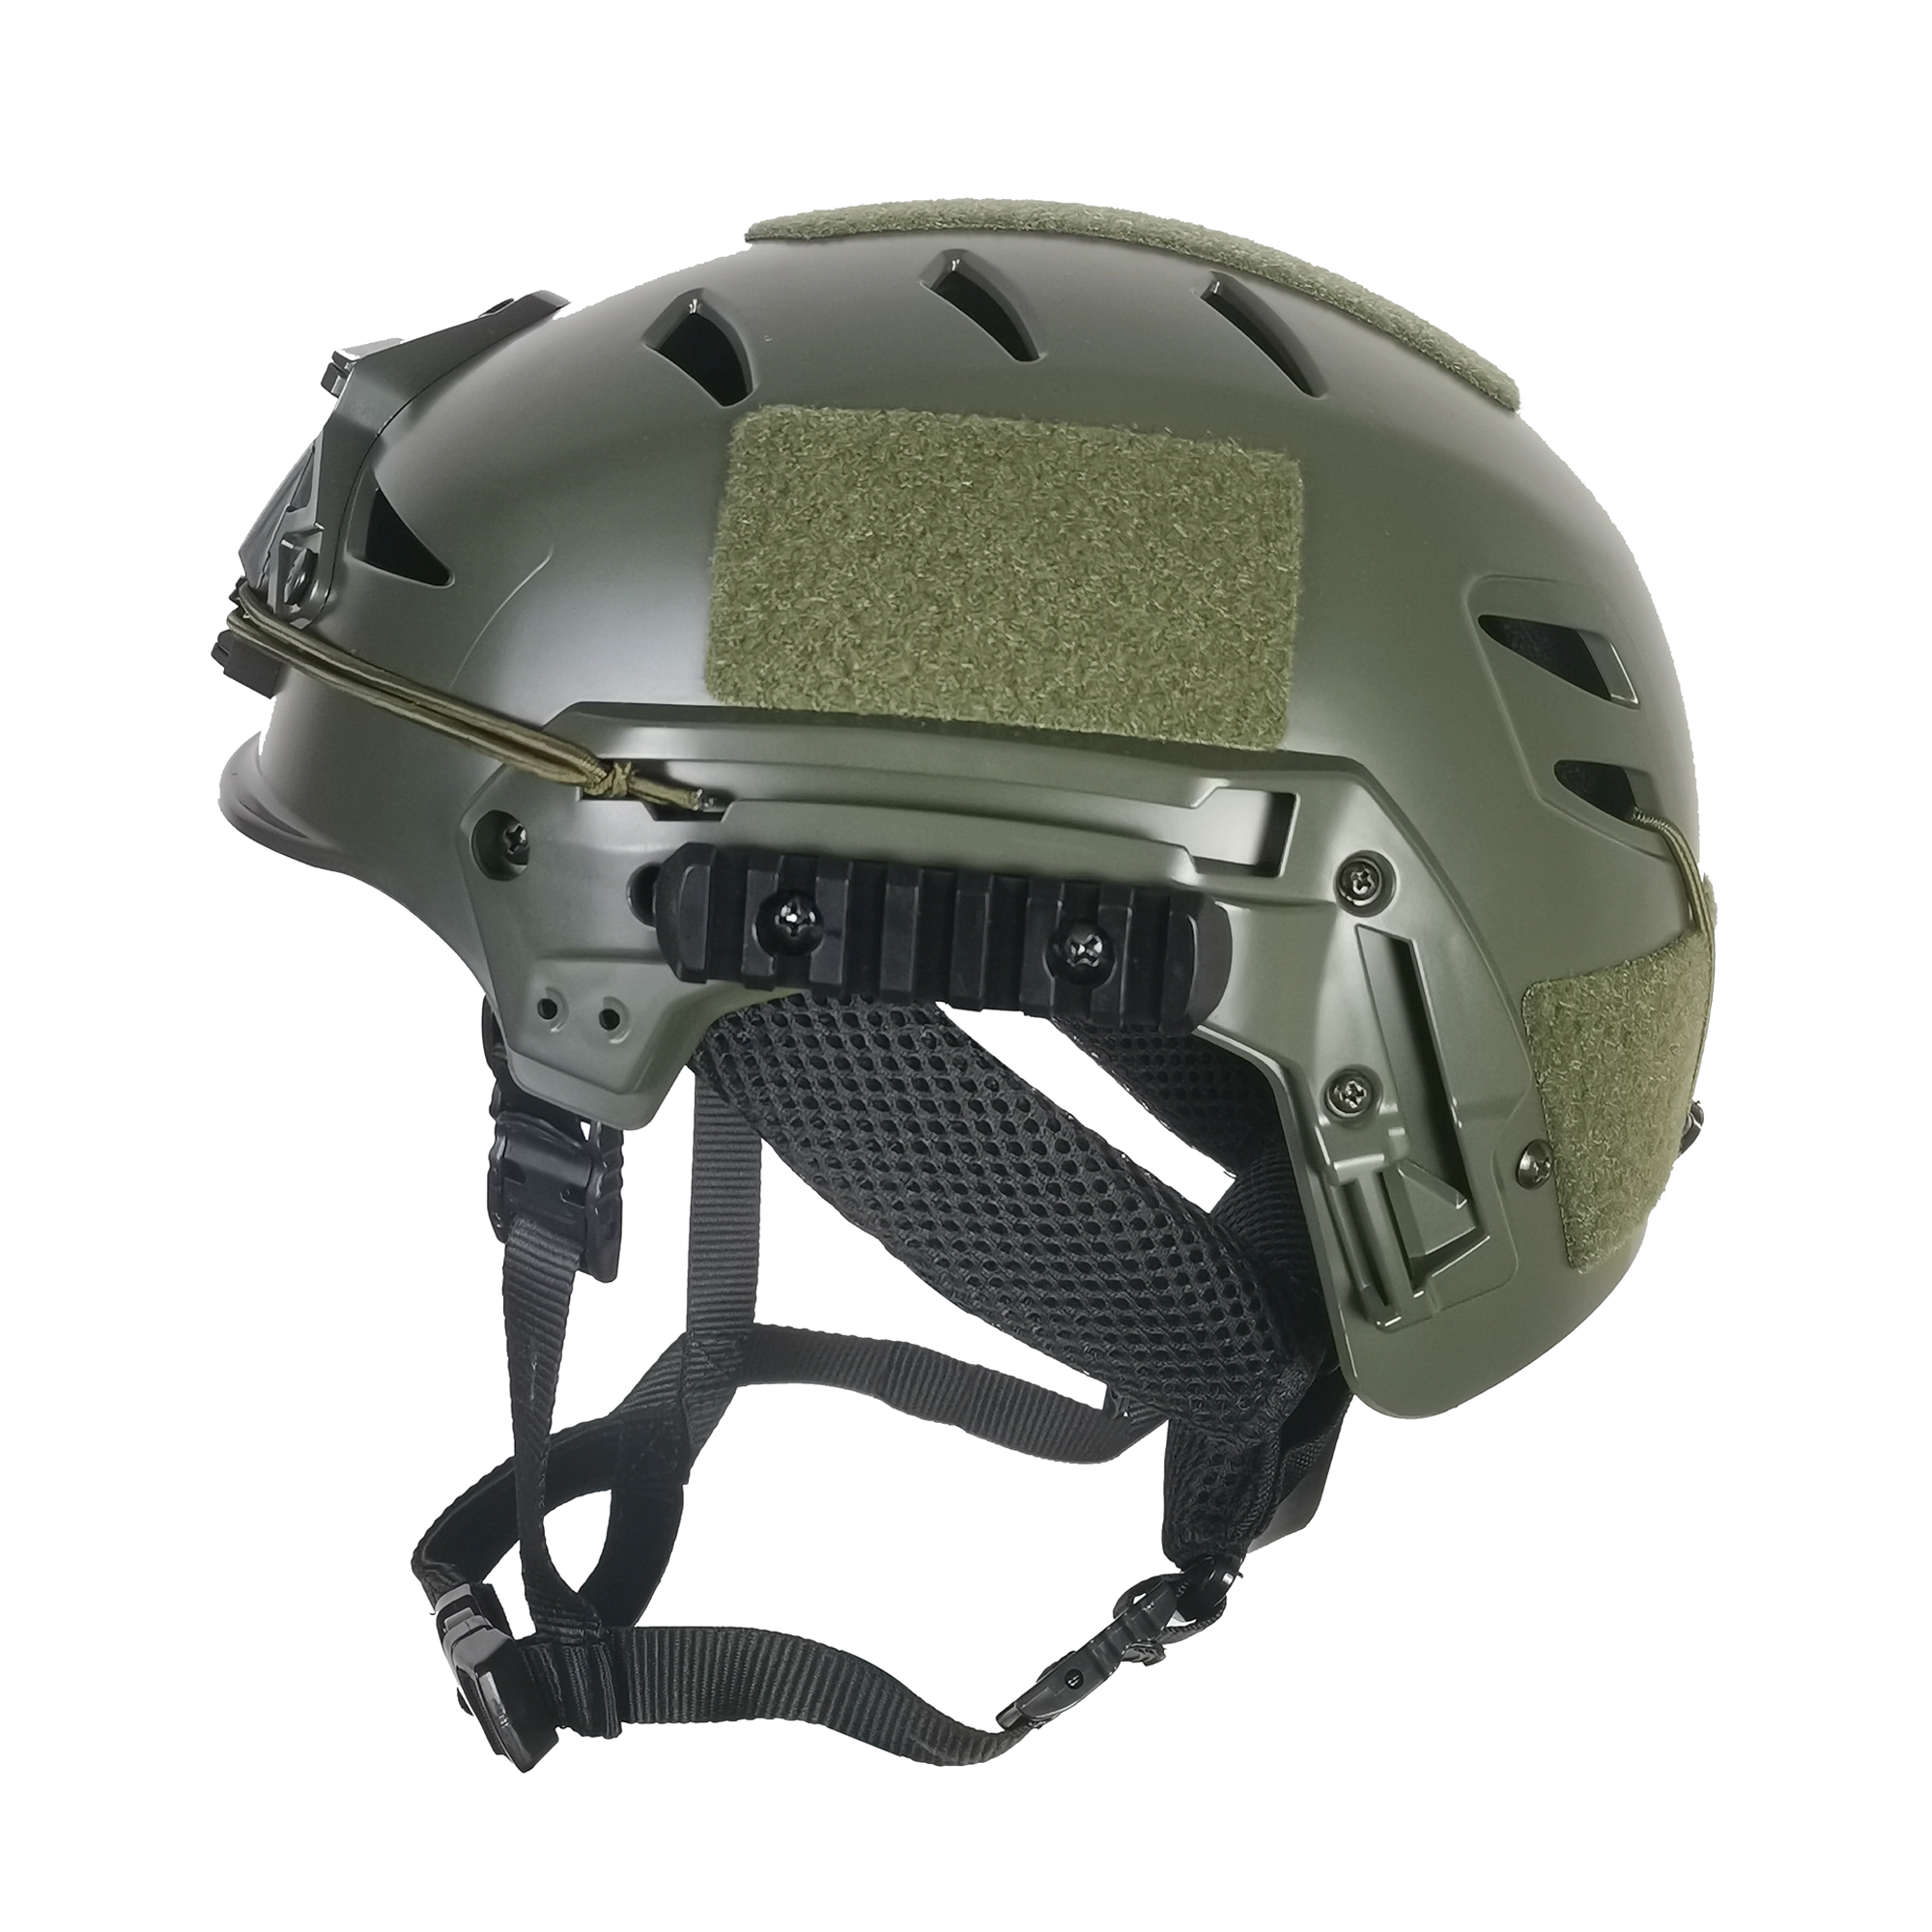 Durable and Protective Combat Helmets for Military and Law Enforcement